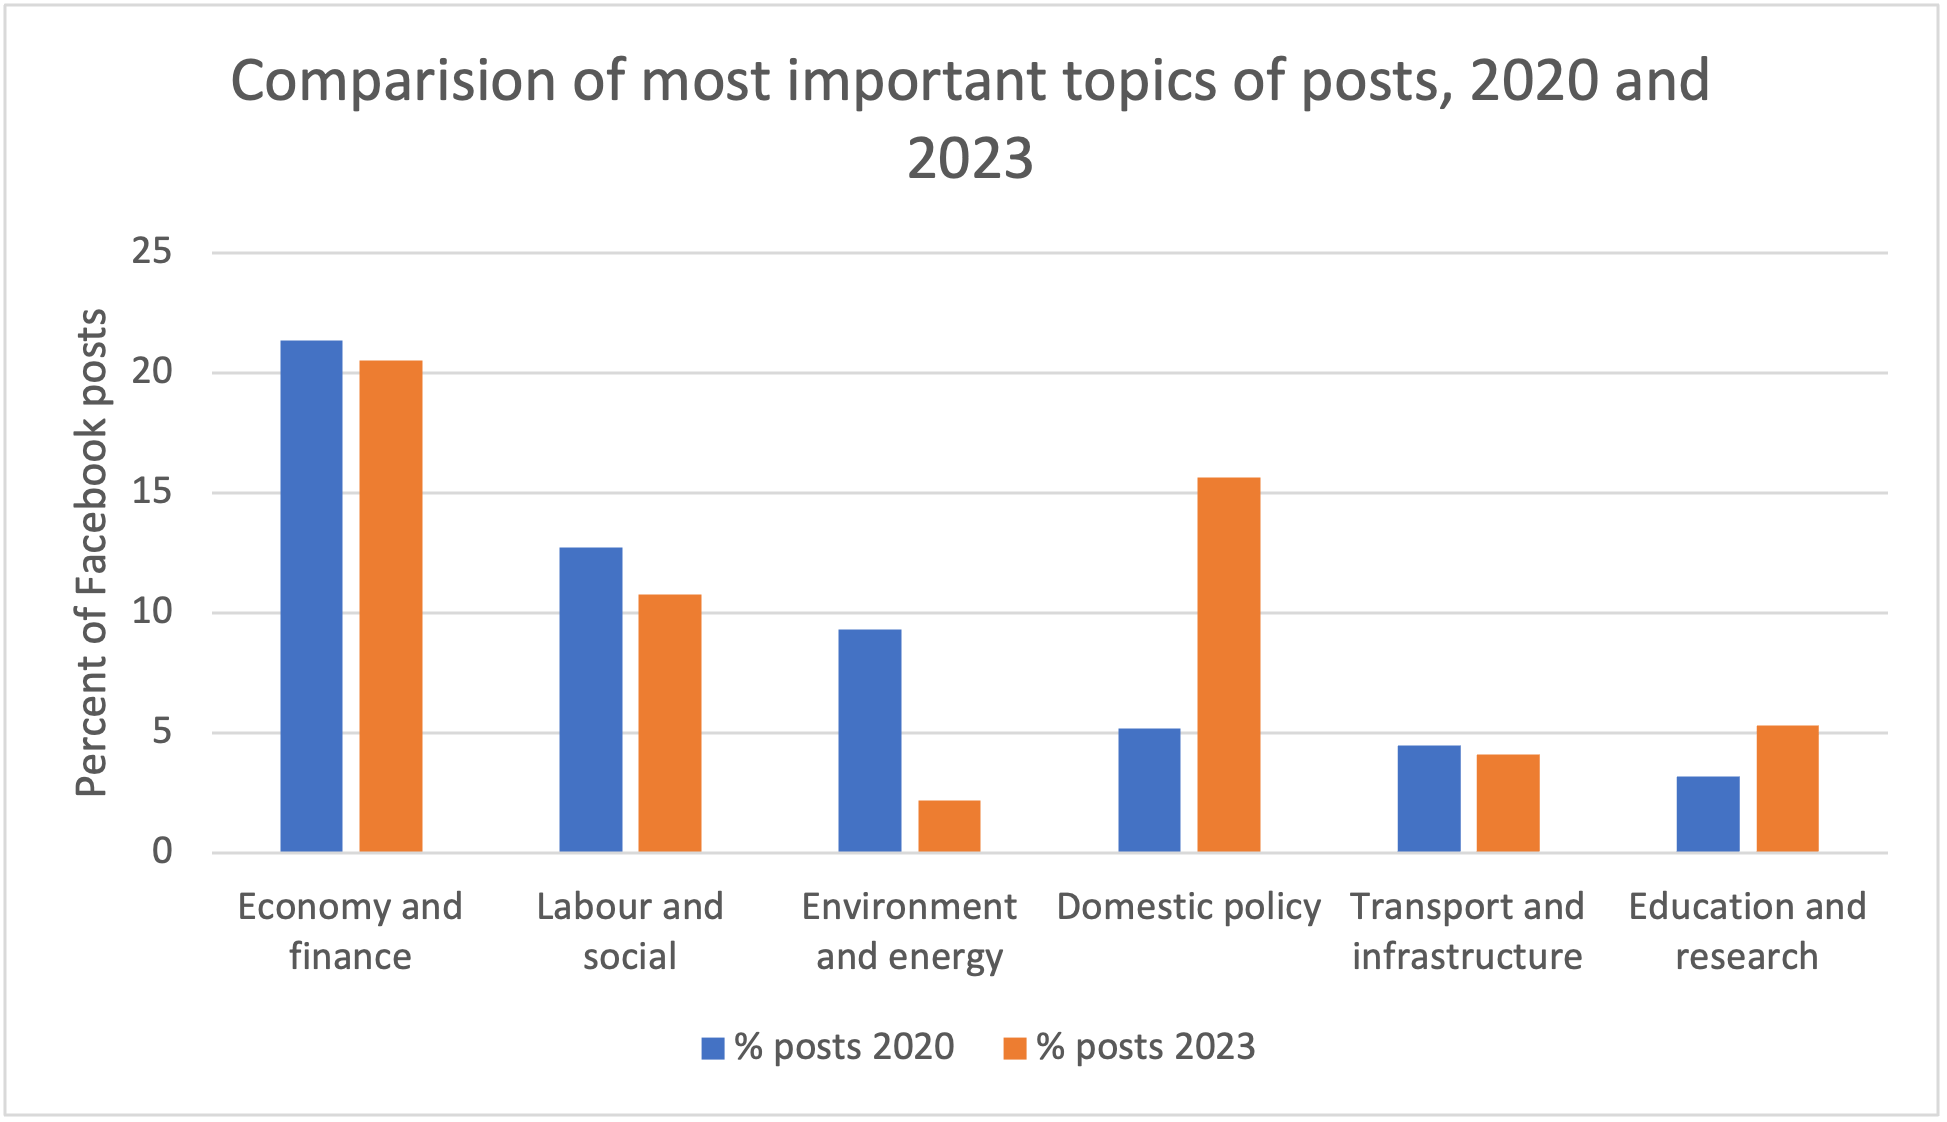 Comparision of most important topics of posts, 2020 and 2023